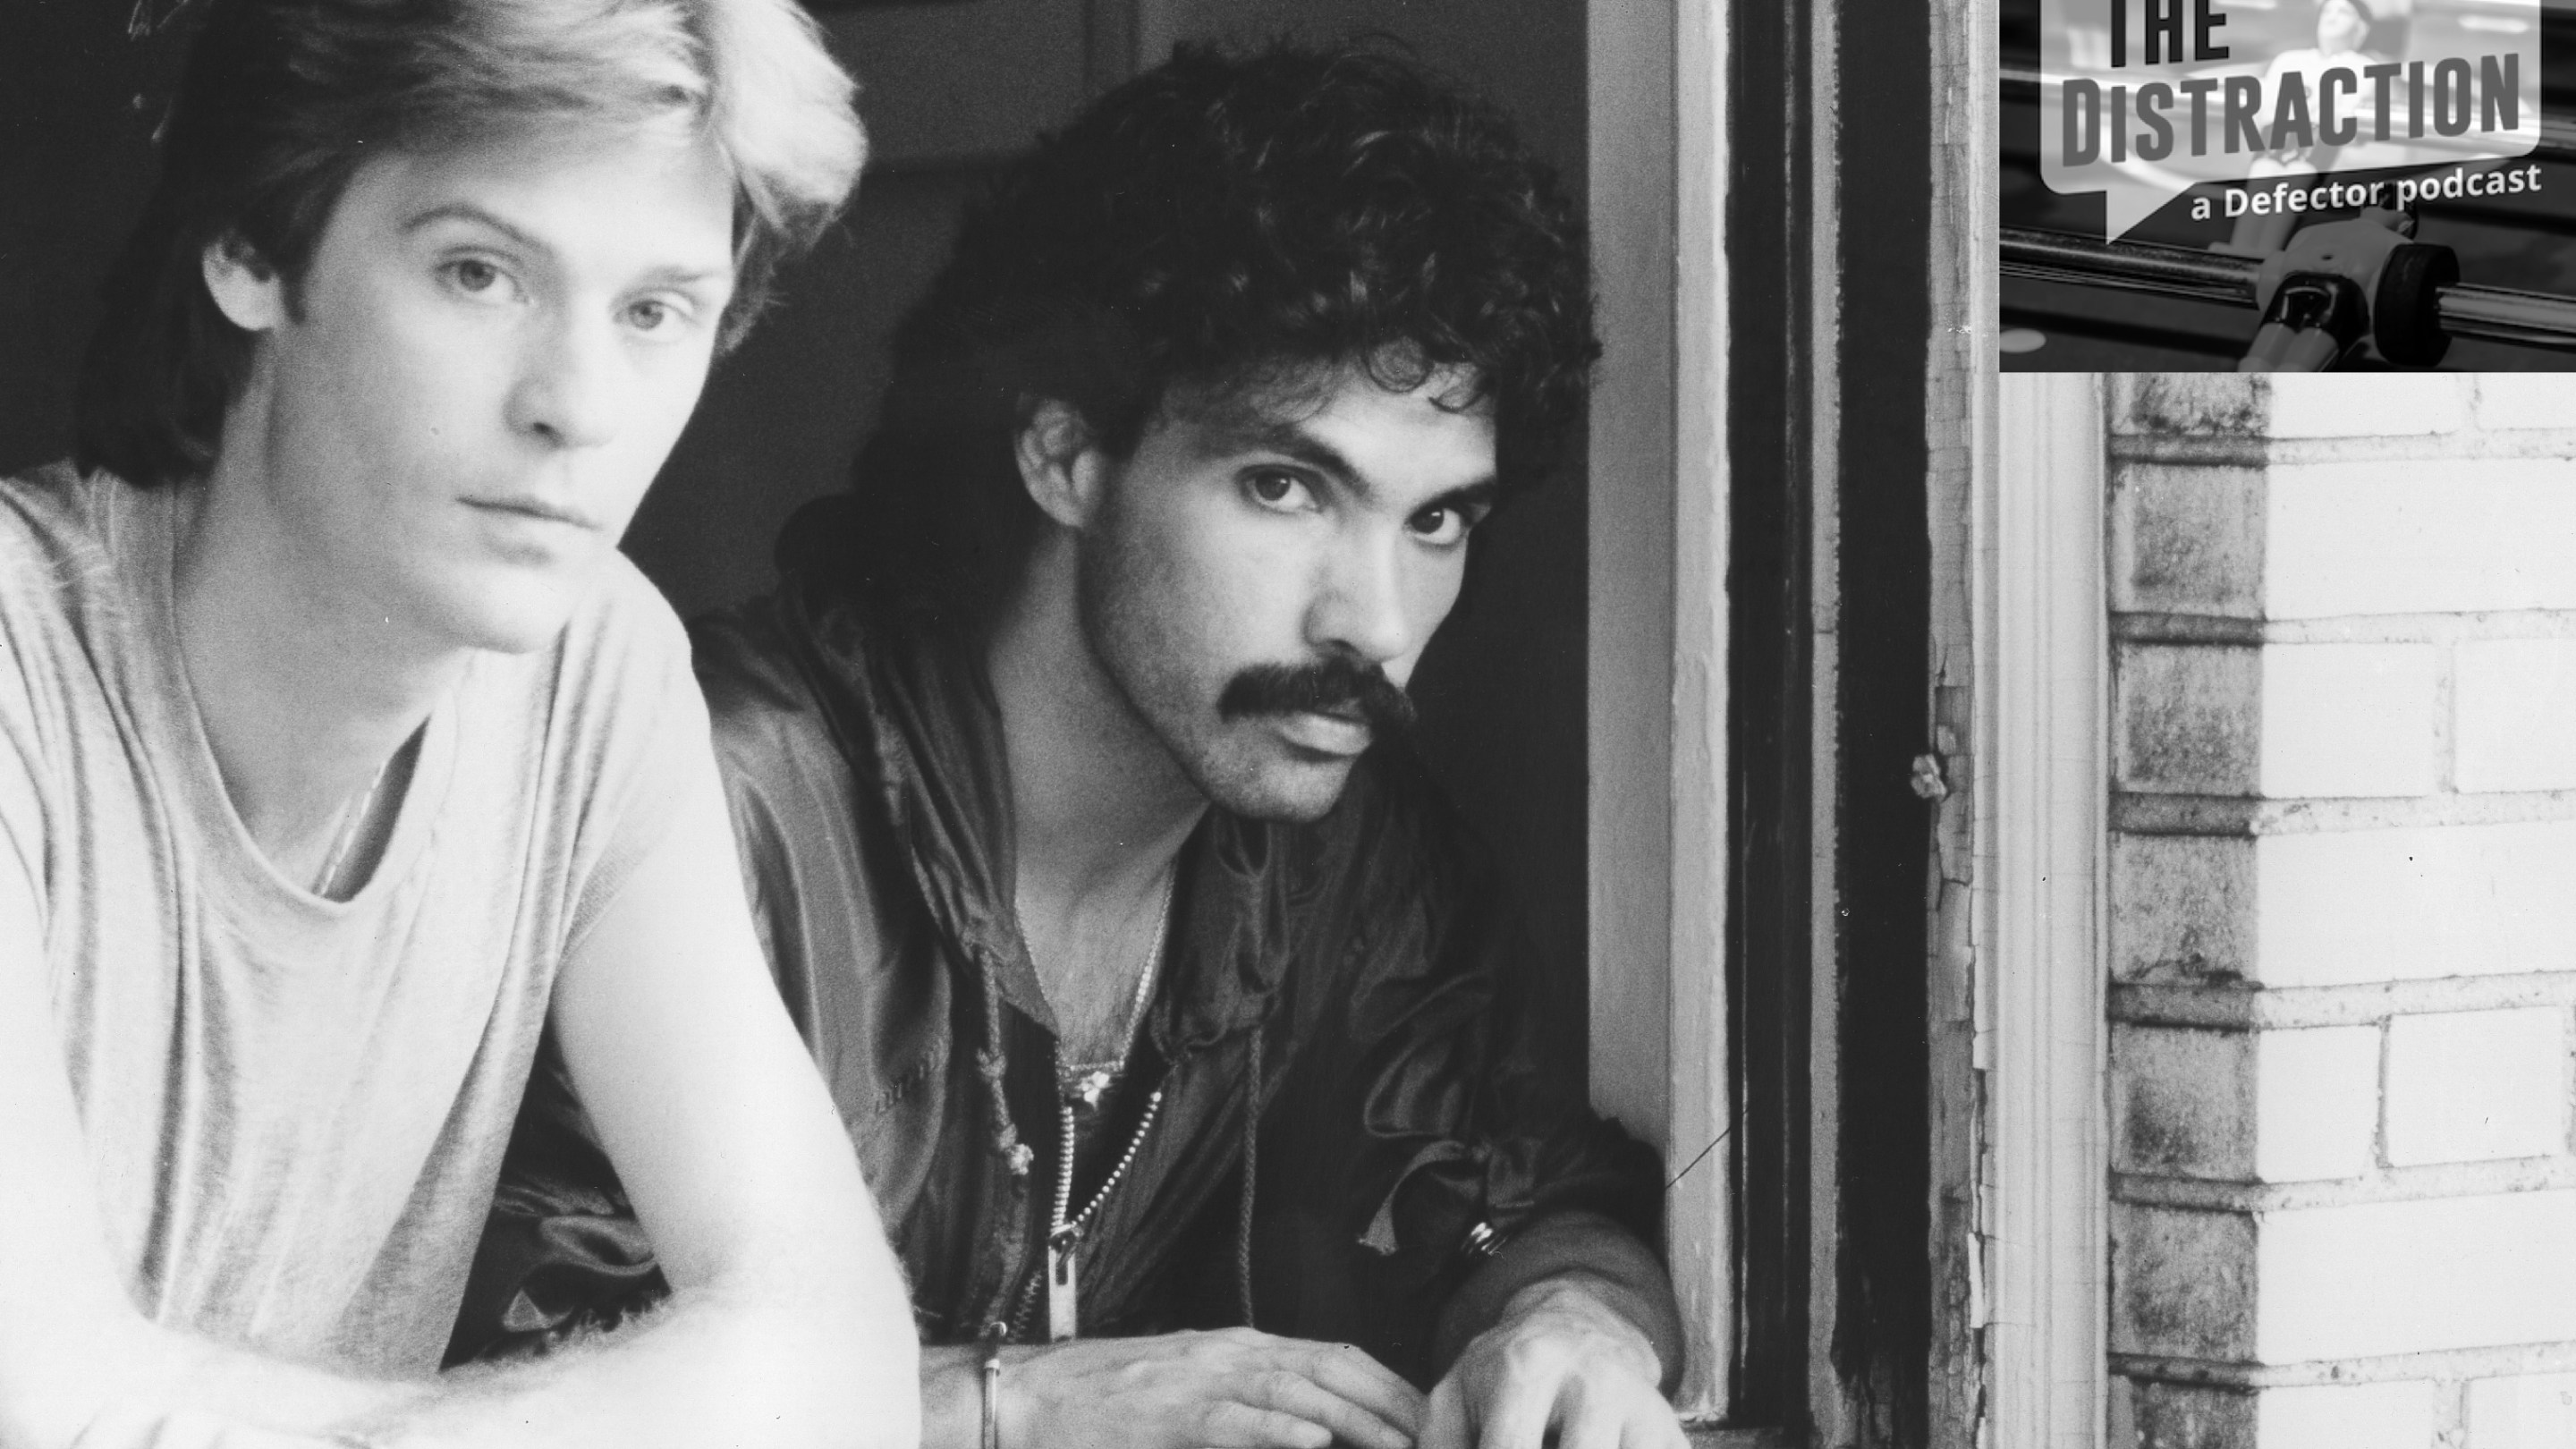 A black-and-white 1970 photograph of Hall & Oates looking out the window of an apartment building, taken by Michael Ochs. The Distraction logo is at upper right.